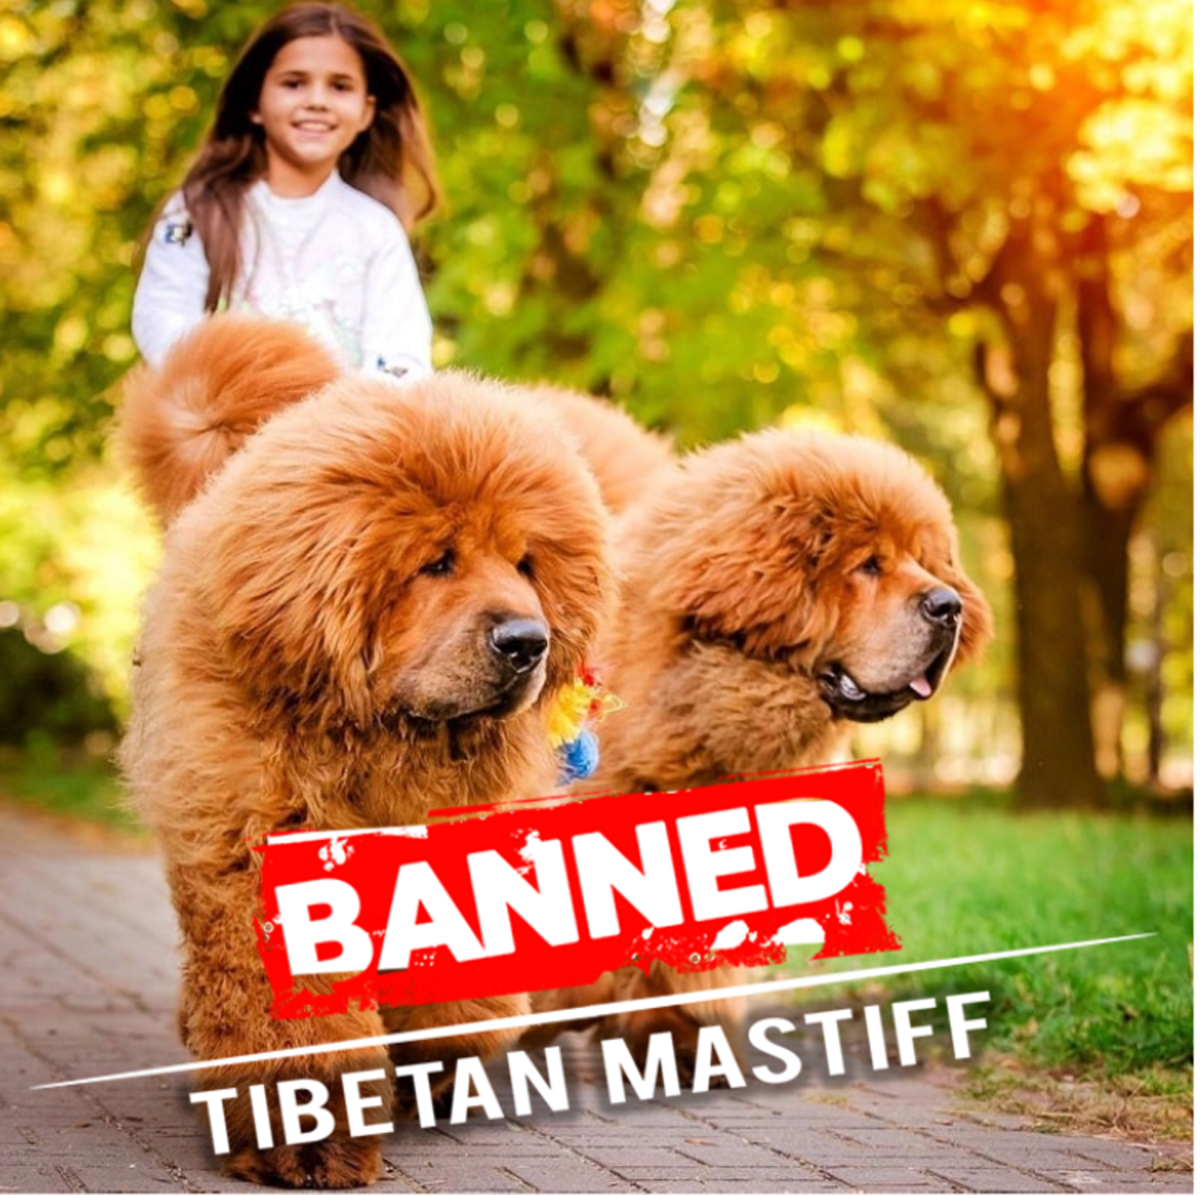 7 Countries, Where Tibetan Mastiffs are Banned or Restricted